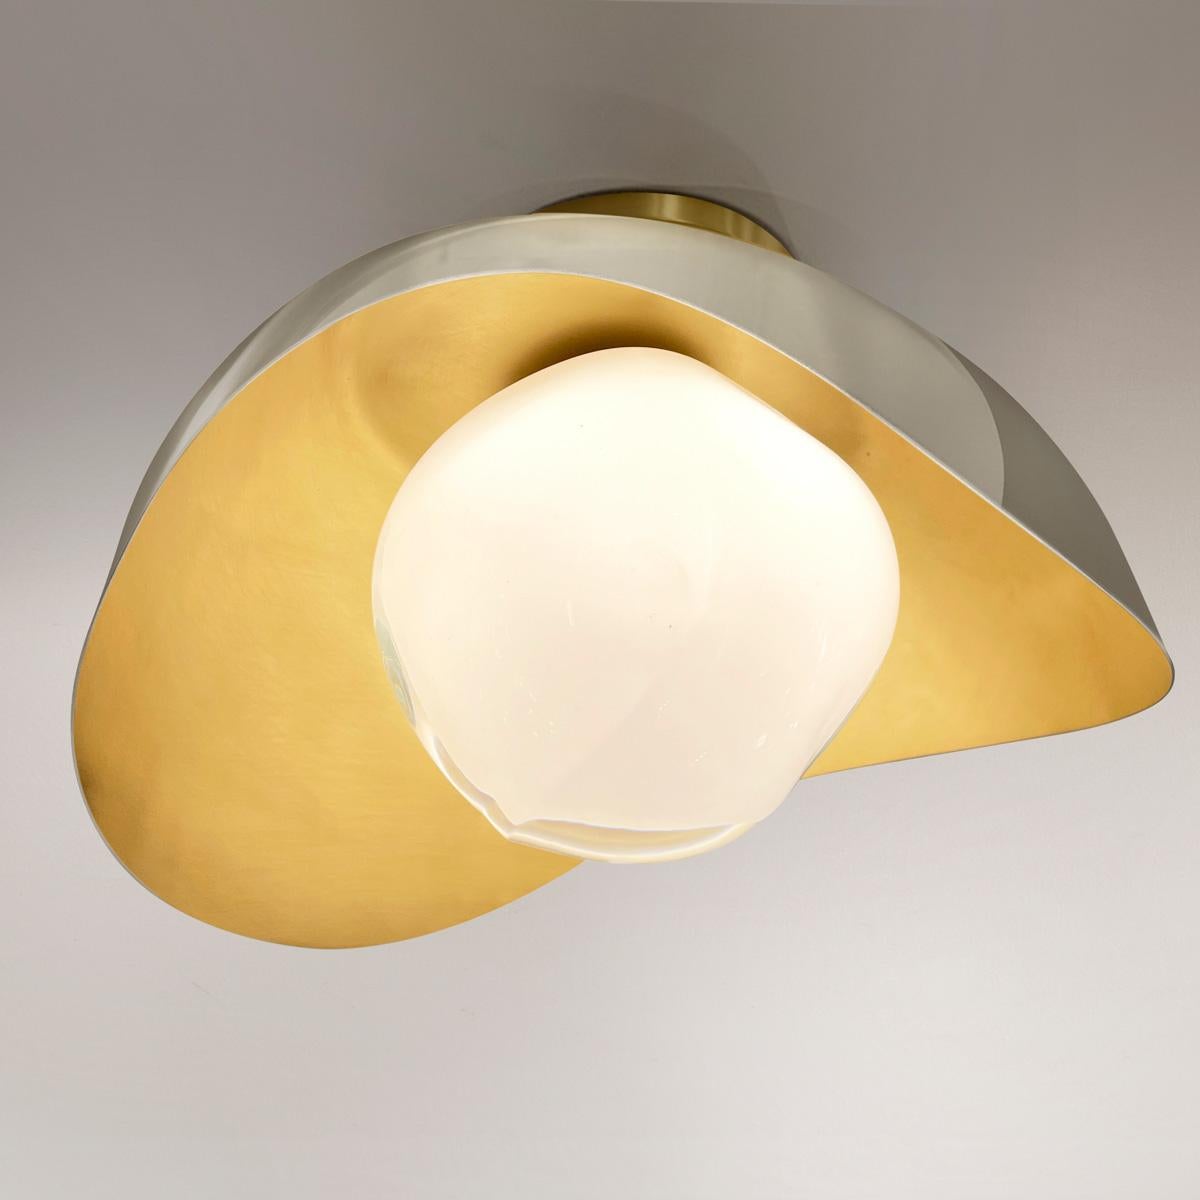 The Perla flushmount features an organic brass shell nestling our Sfera glass handblown in Tuscany. The first images show the fixture with a satin brass interior and polished nickel exterior finish-subsequent pictures show it in a selection of